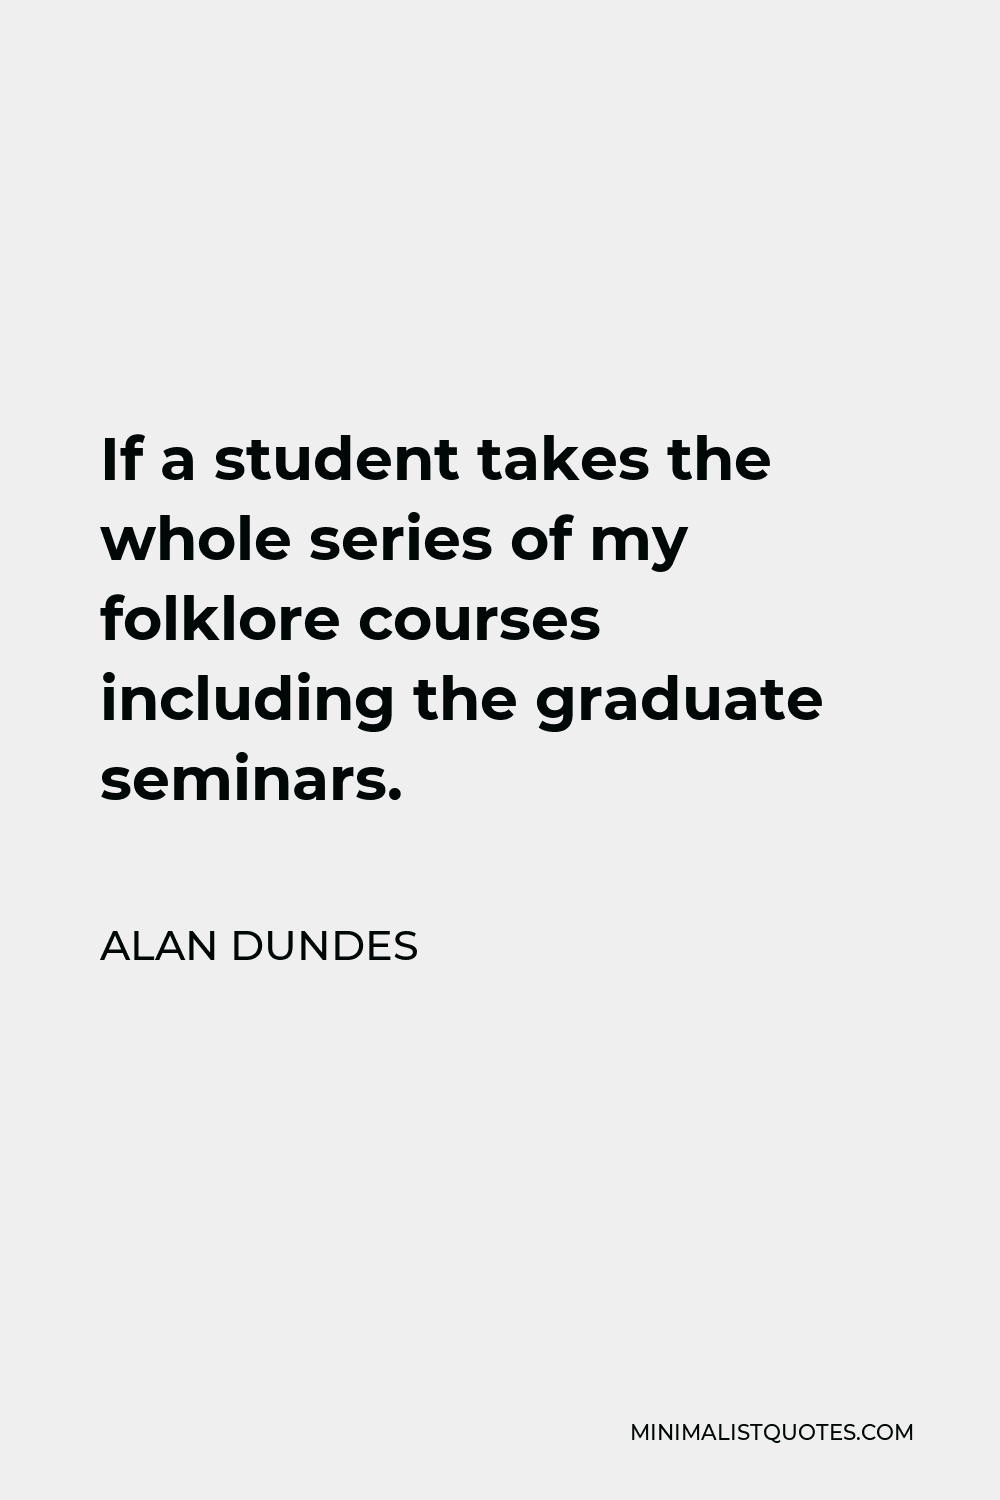 Alan Dundes Quote - If a student takes the whole series of my folklore courses including the graduate seminars.